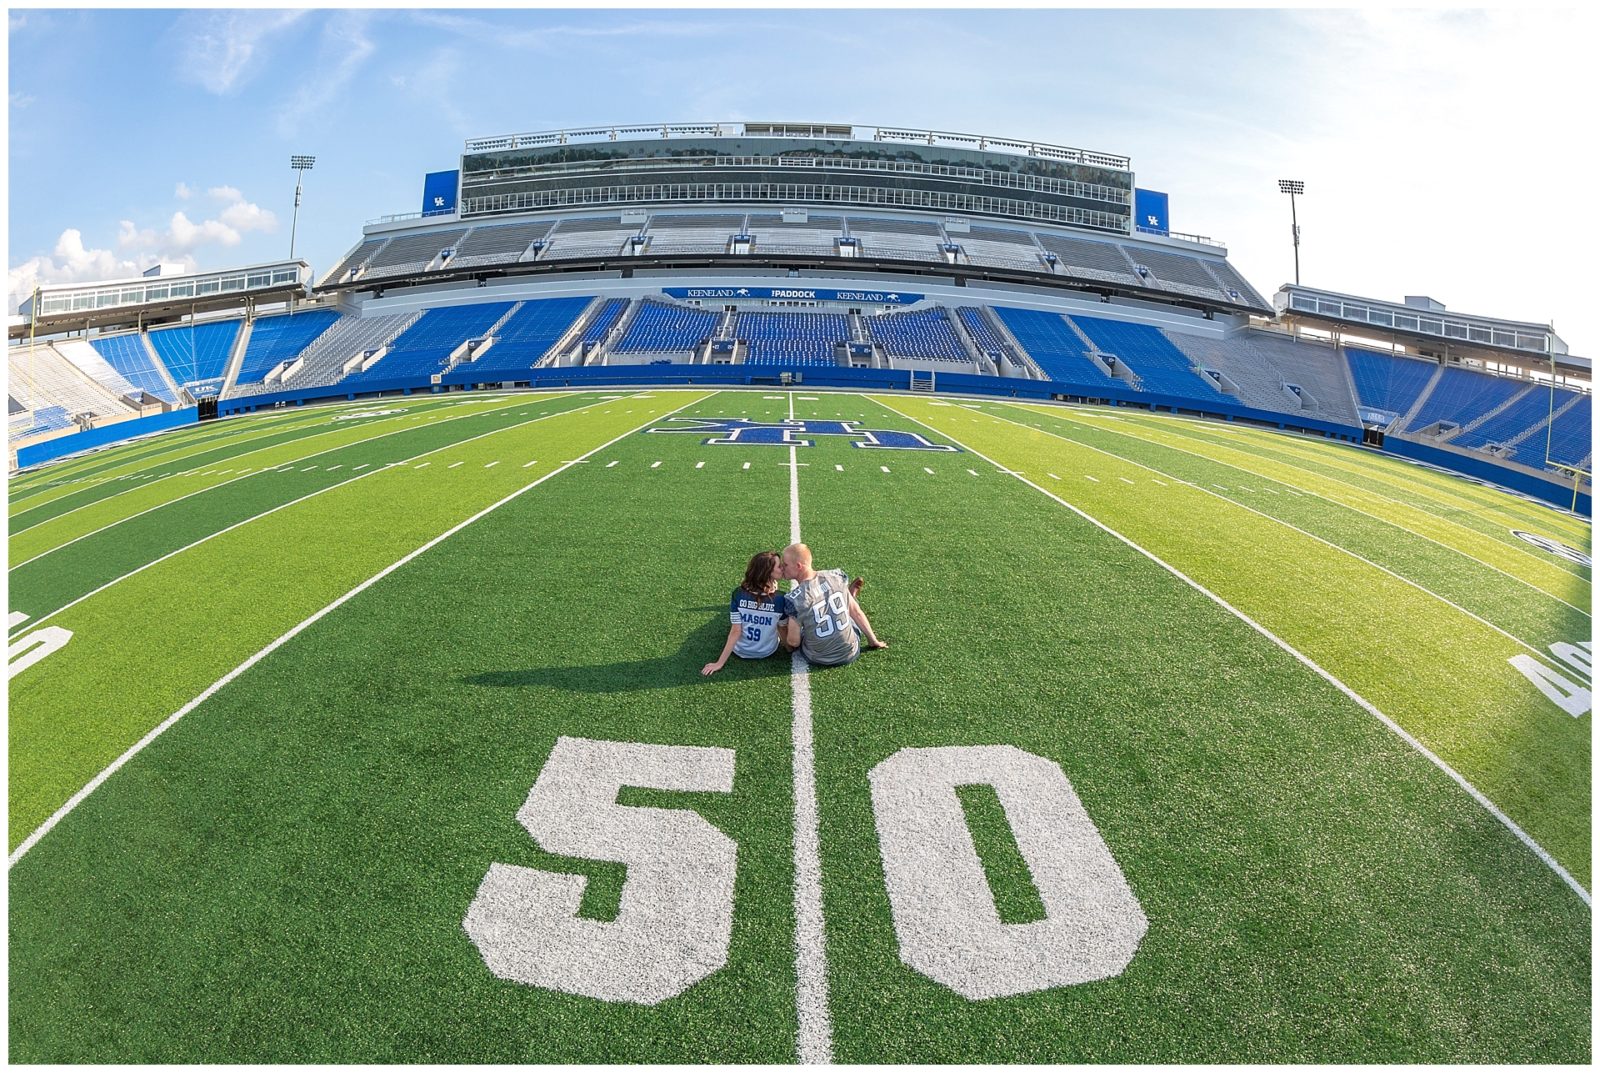 Engagement session at Commonwealth Stadium with former University of Kentucky football player Kelly Mason & his fiancee Jalyn. Photo by Kevin and Anna Photography www.kevinandannaweddings.com